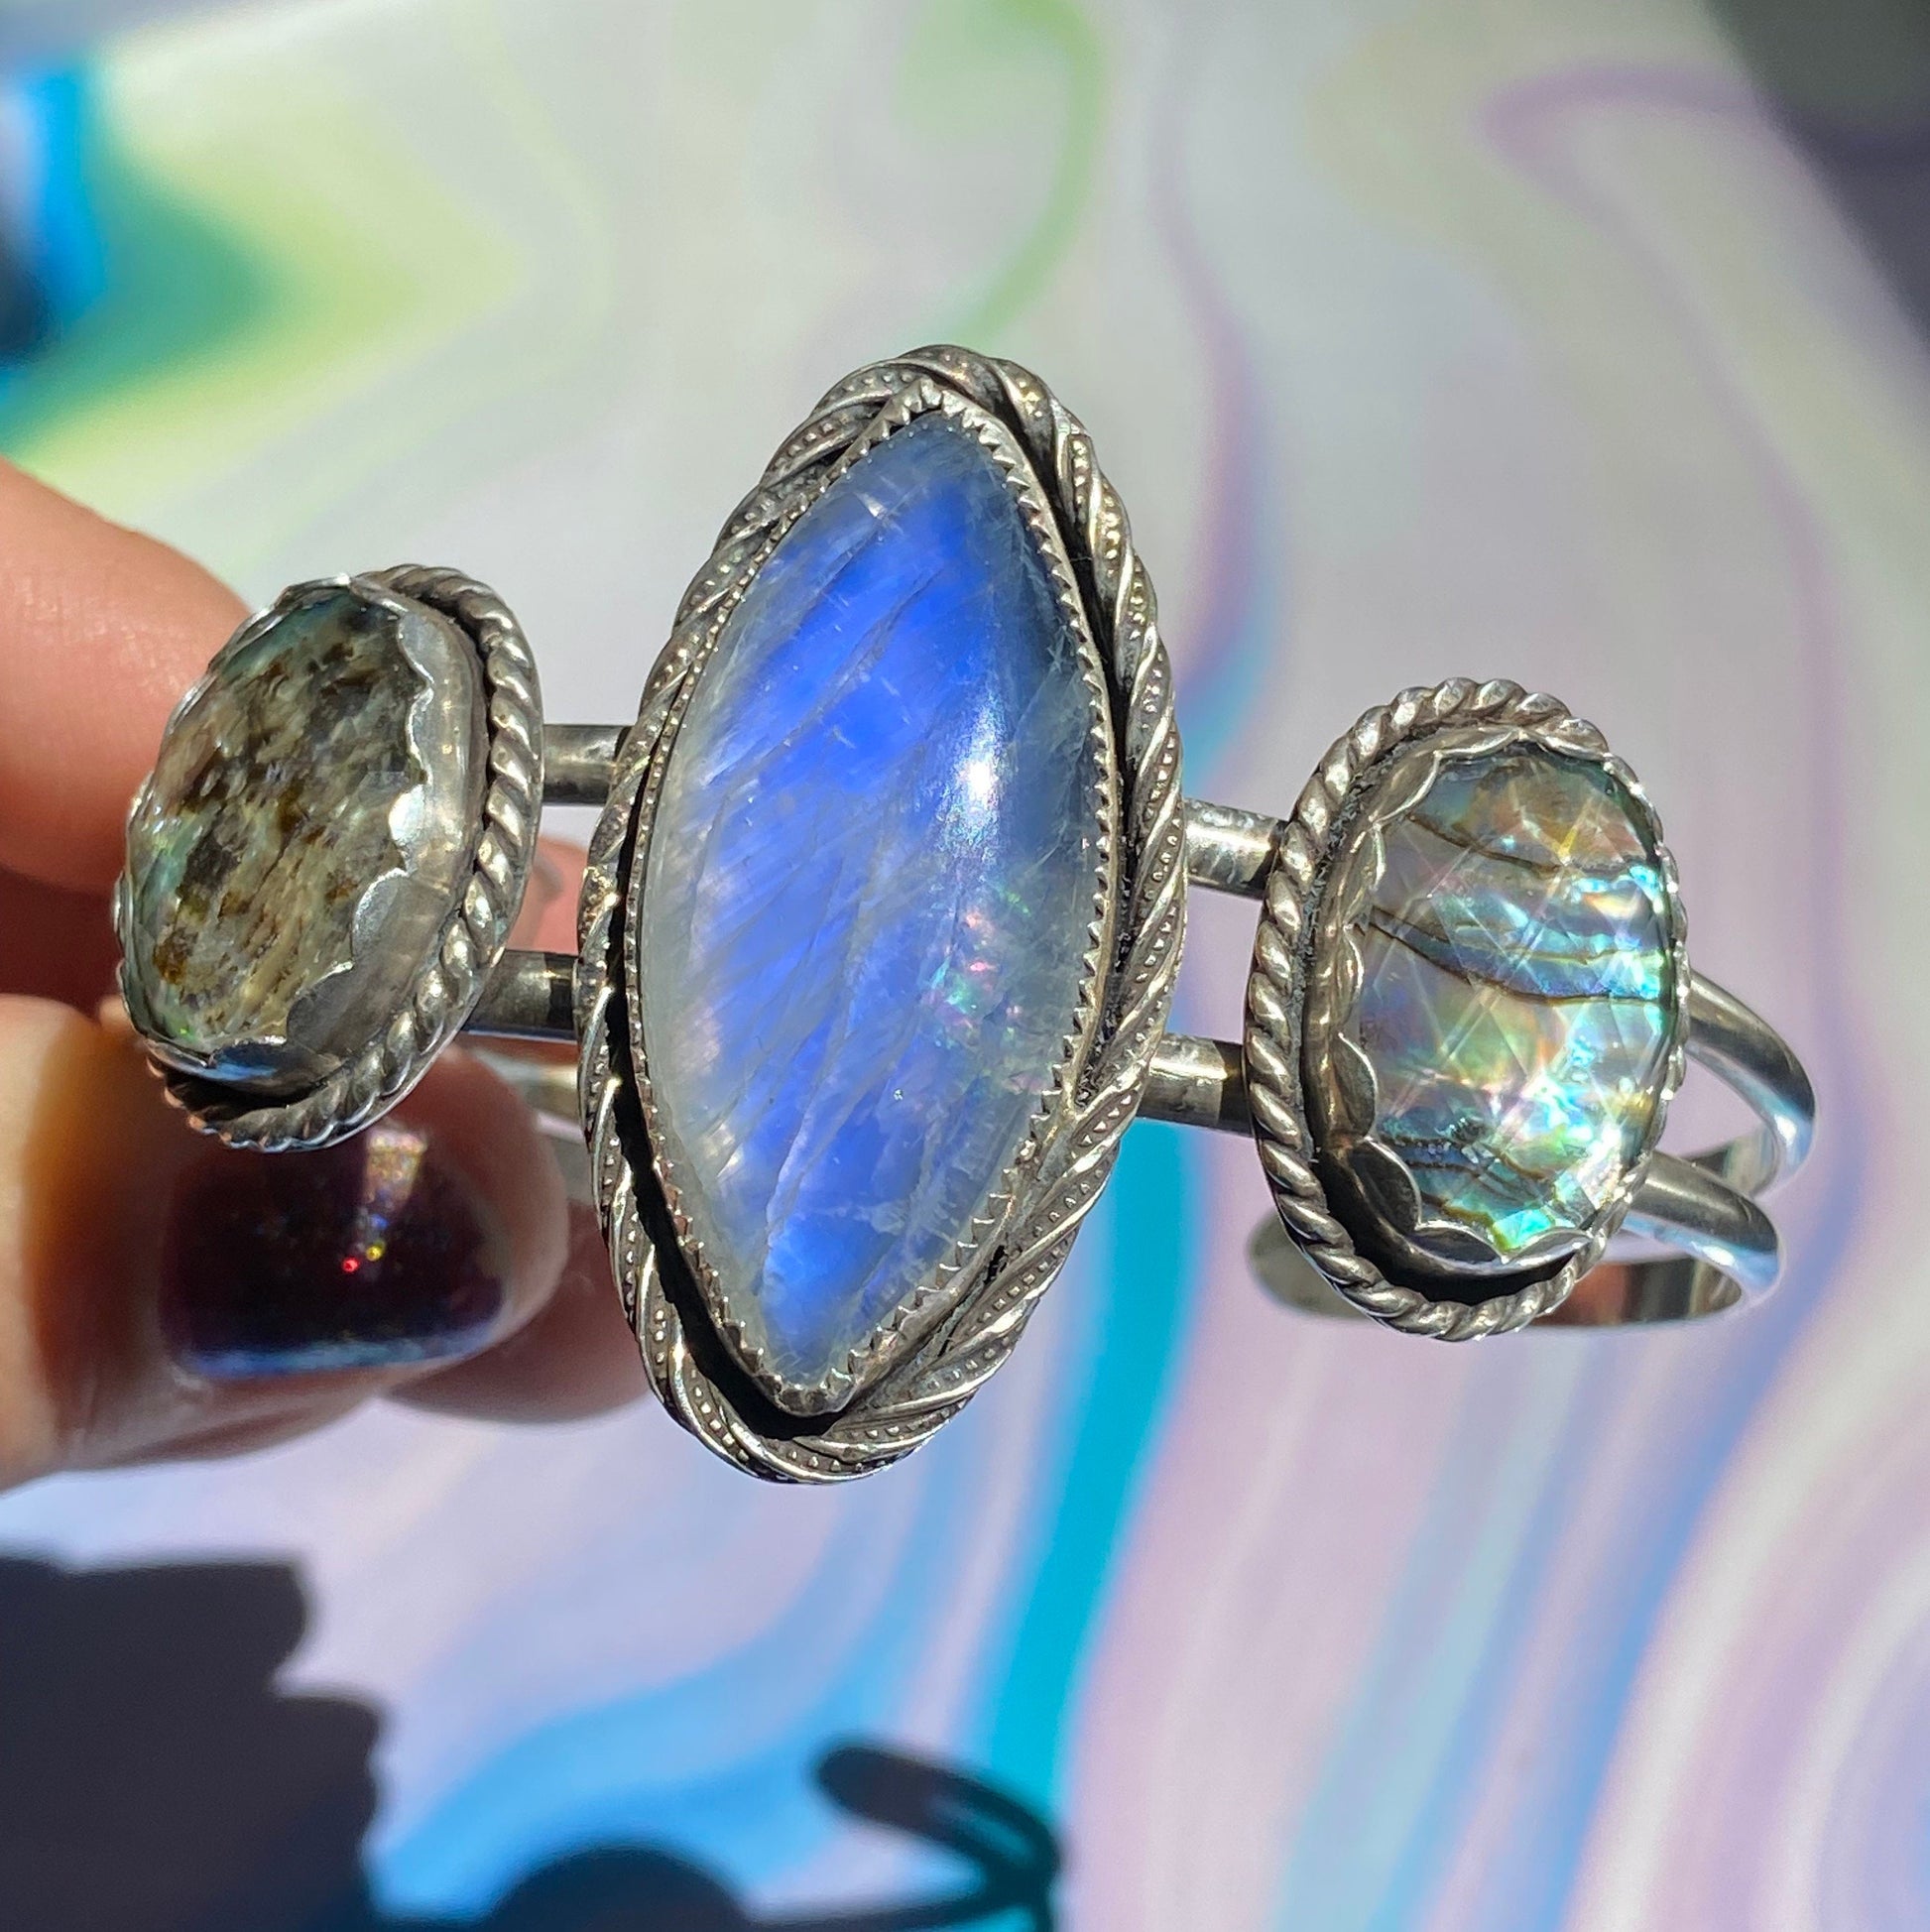 Cuff a Abalone/Quartz Collecti Doublet //Once – thebohemianfairie and Dream Upon Moonstone